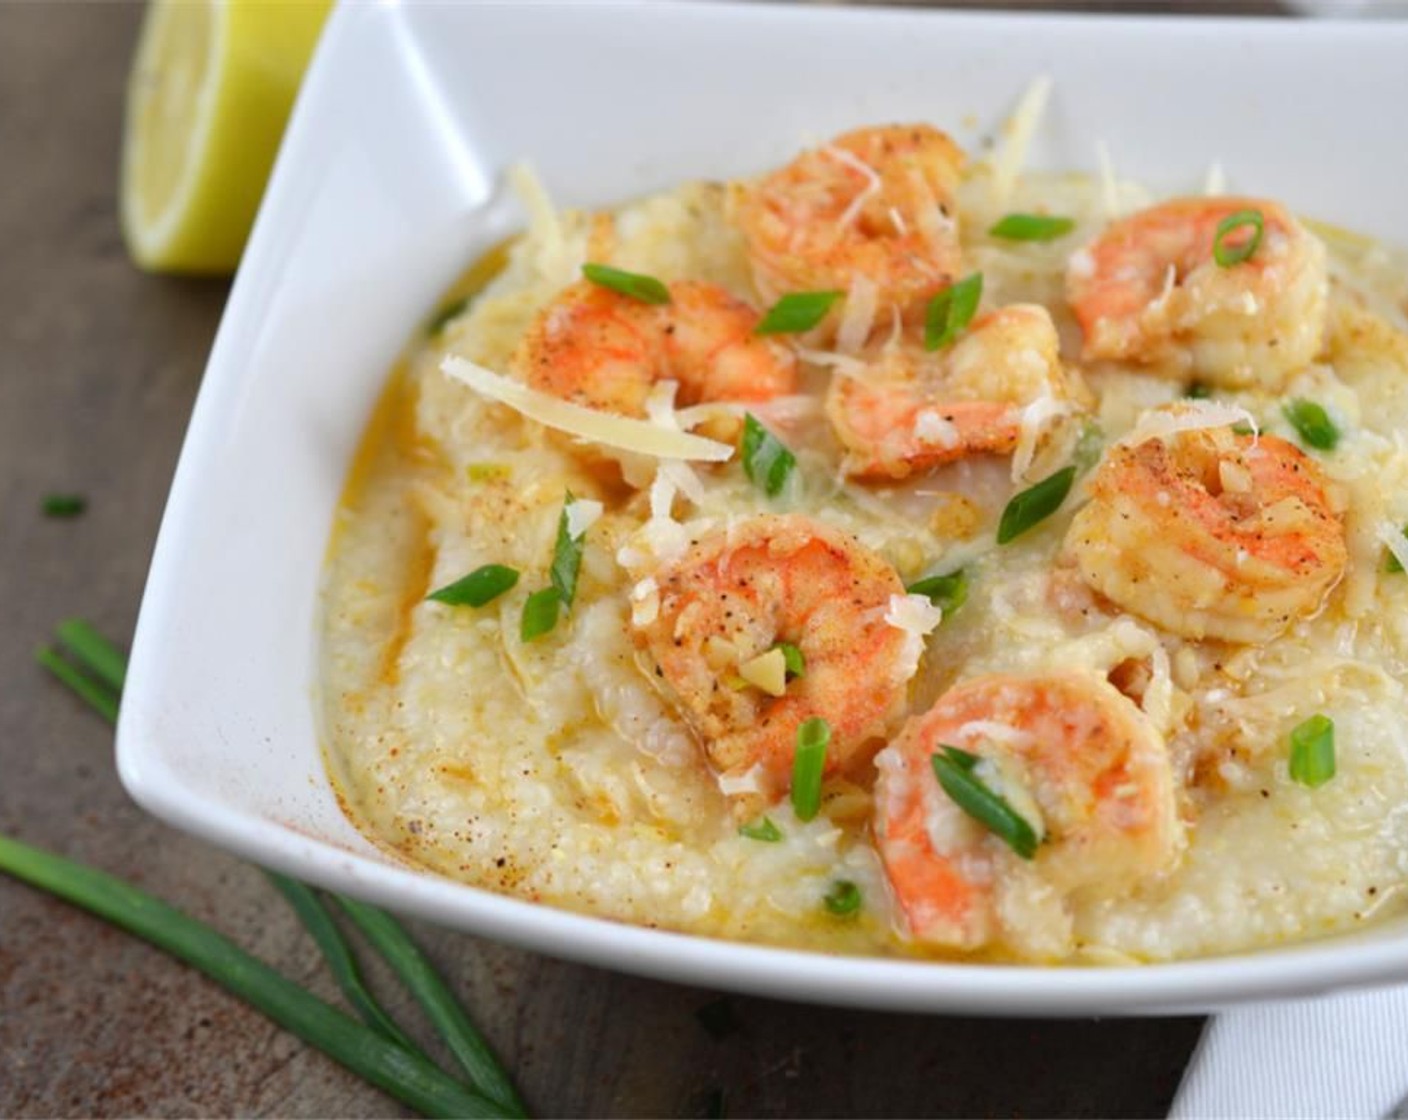 step 7 To serve place grits in individual bowls and top with shrimp mixture. You can always serve family style too in a large platter. Drizzle each bowl/or platter with the extra sauce. Garnish with Fresh Chives (1 Tbsp).